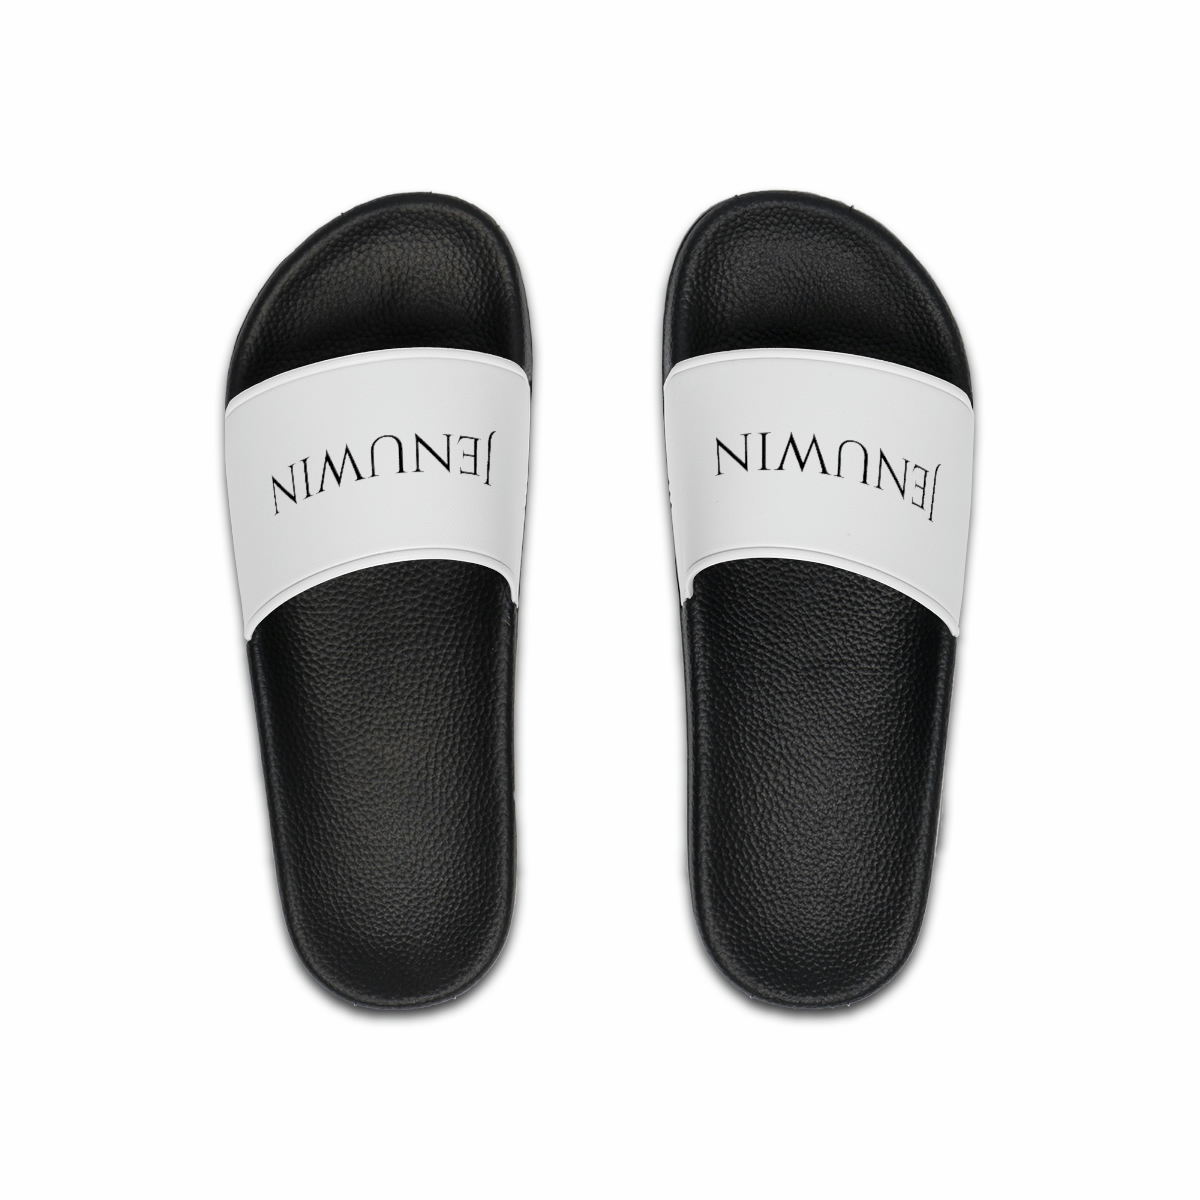 A pair of black and white sandals with the word " namaste " written on them.